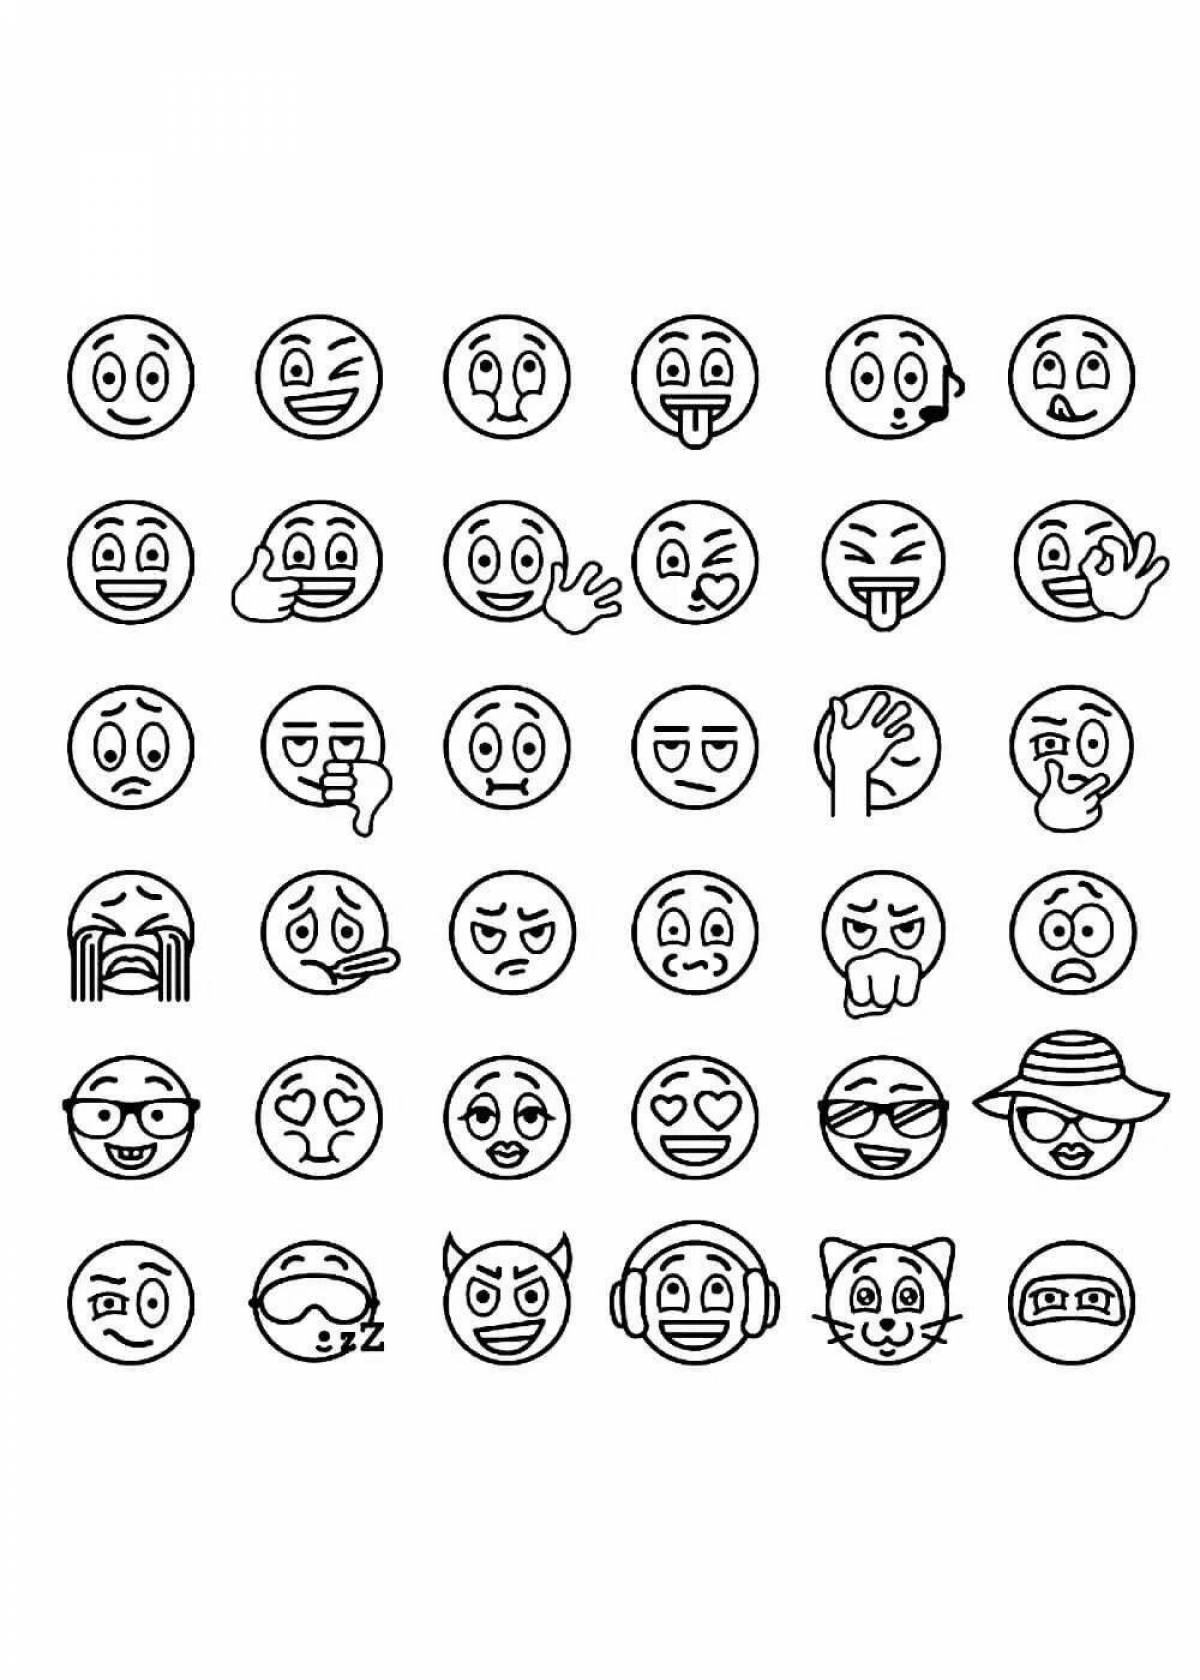 Exquisite coloring small emoticons for stickers